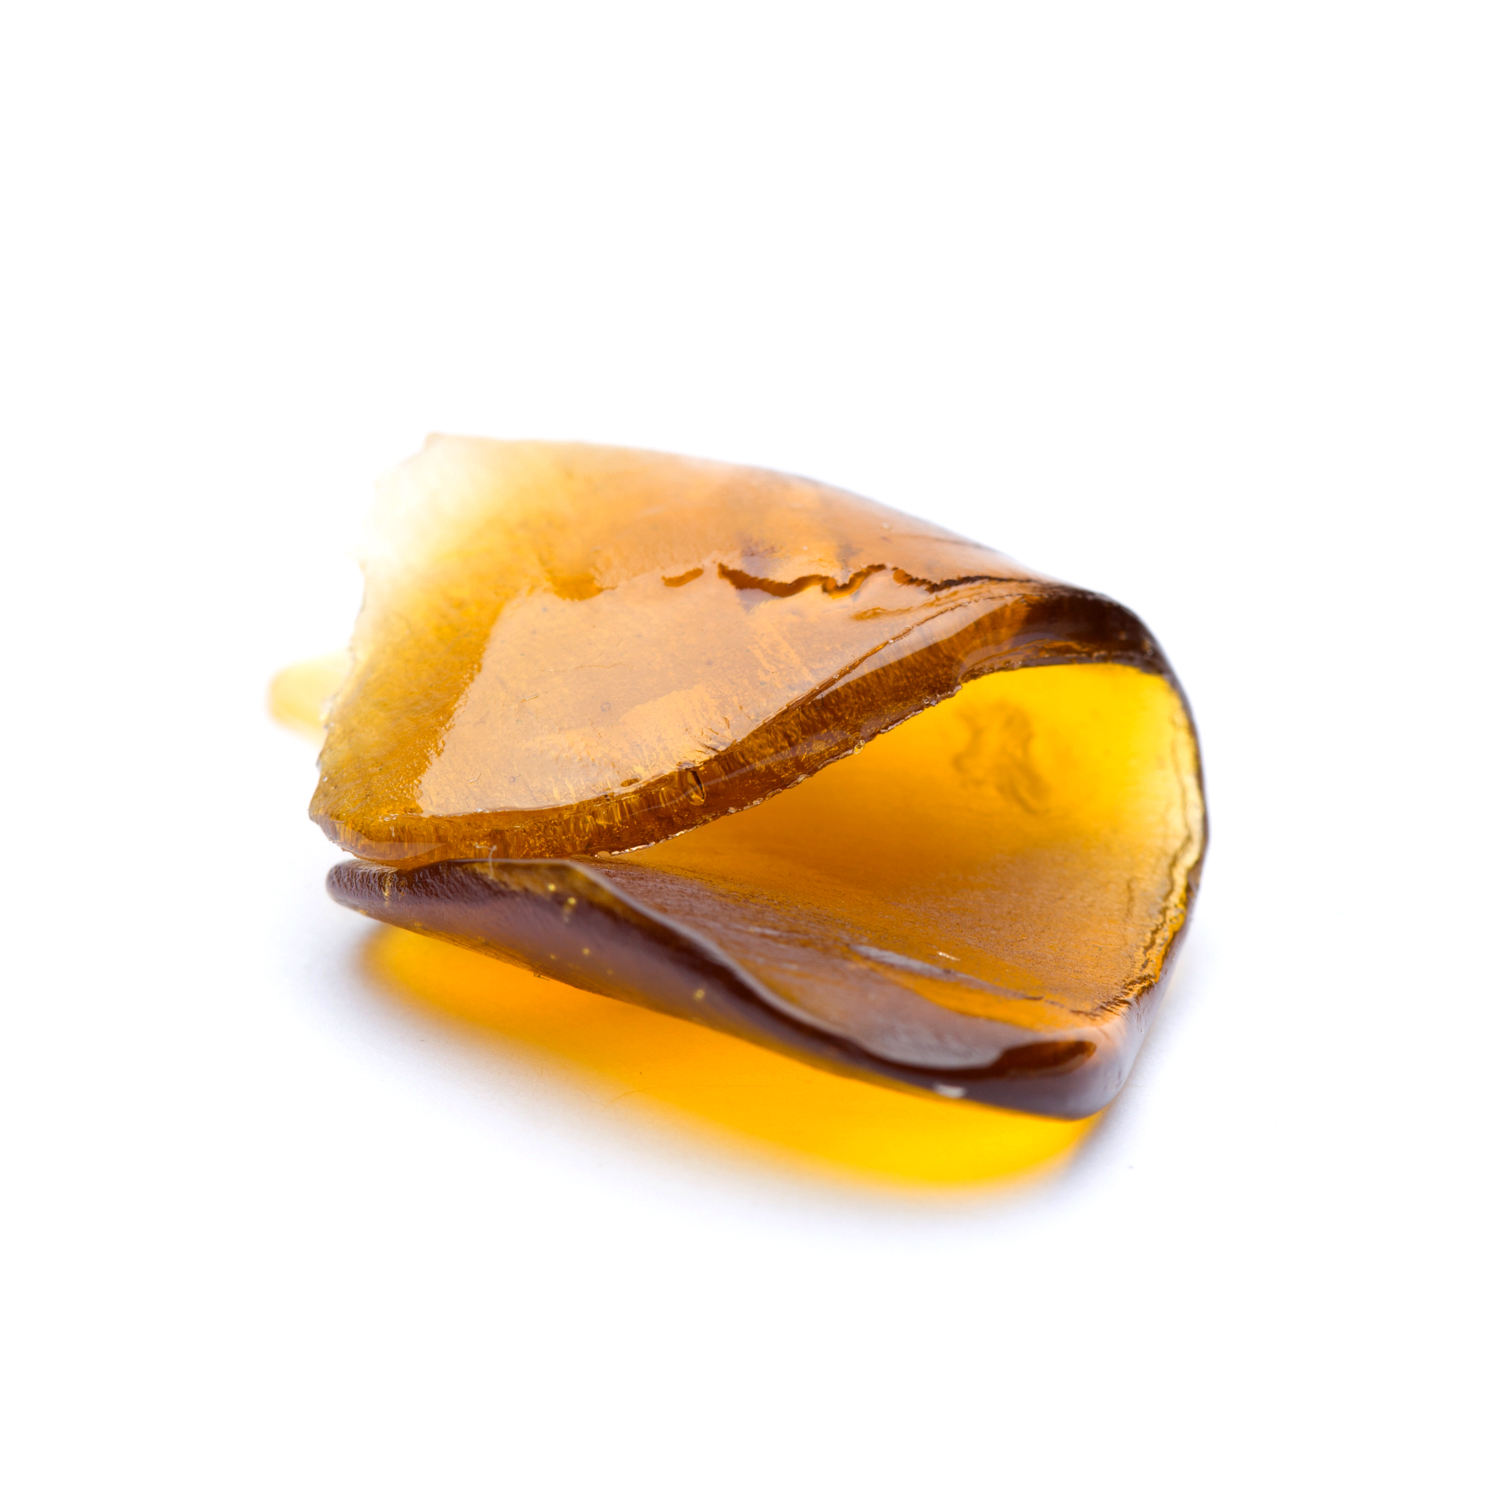 Chemdawg shatter vs wax is a sativa dominant hybrid strain of cannabis